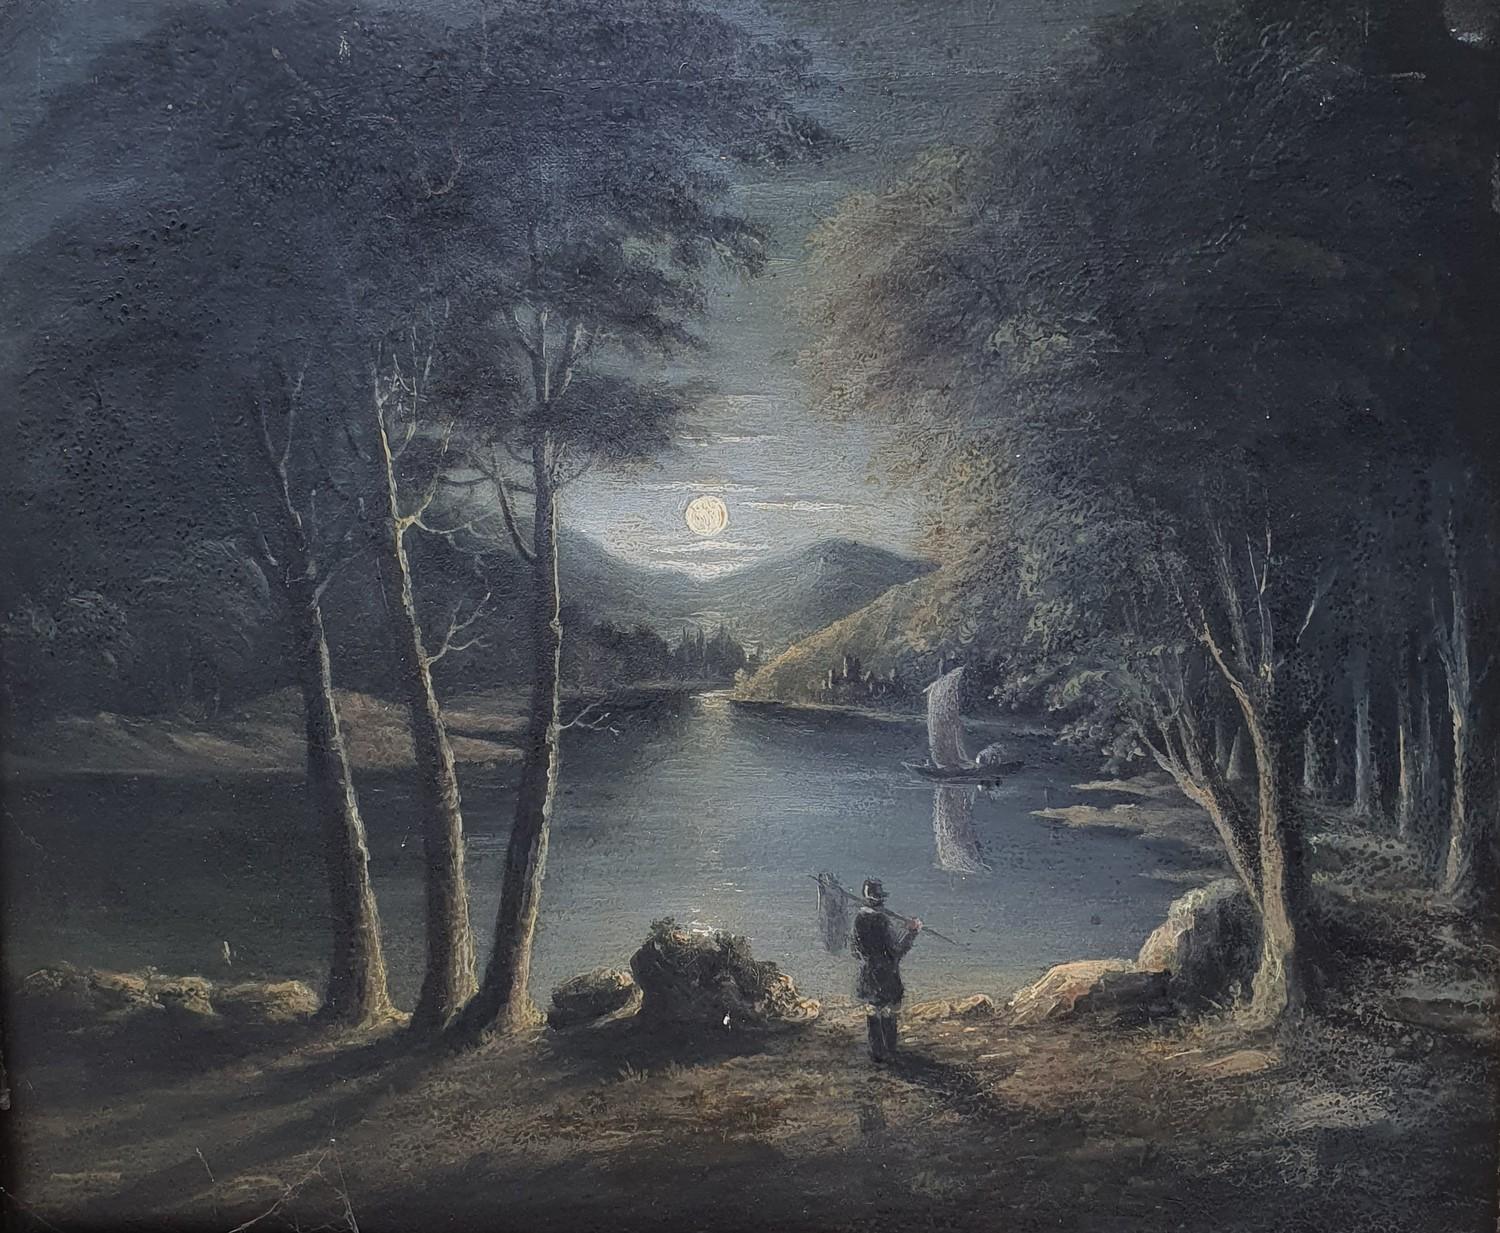 Manner of Abraham Pether, a nocturnal scene with figure, oil on canvas, 28 x 23 cm